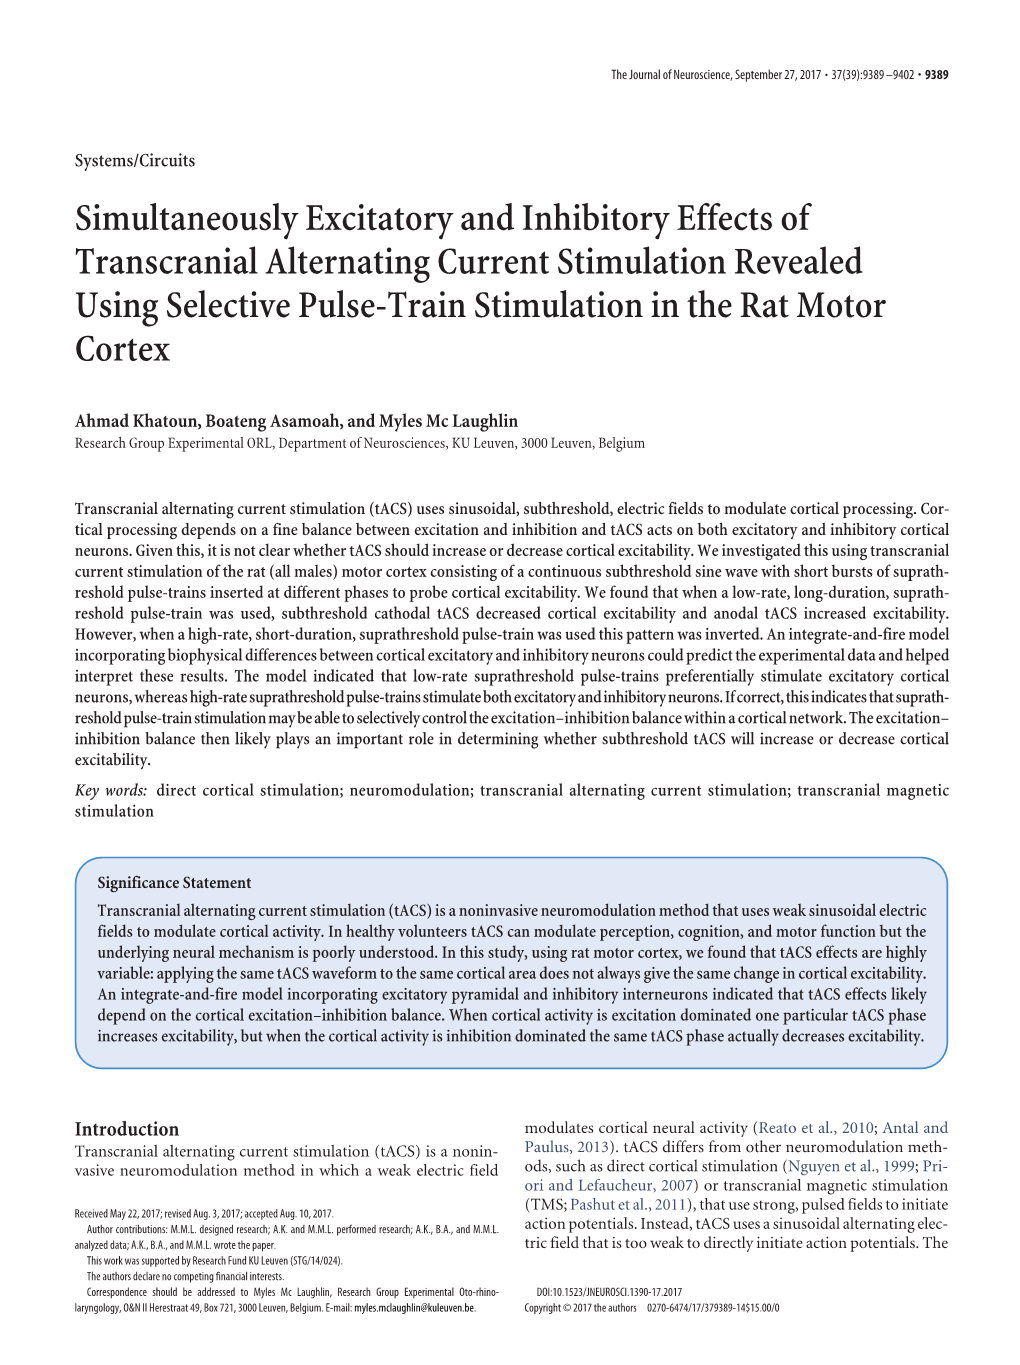 Simultaneously Excitatory and Inhibitory